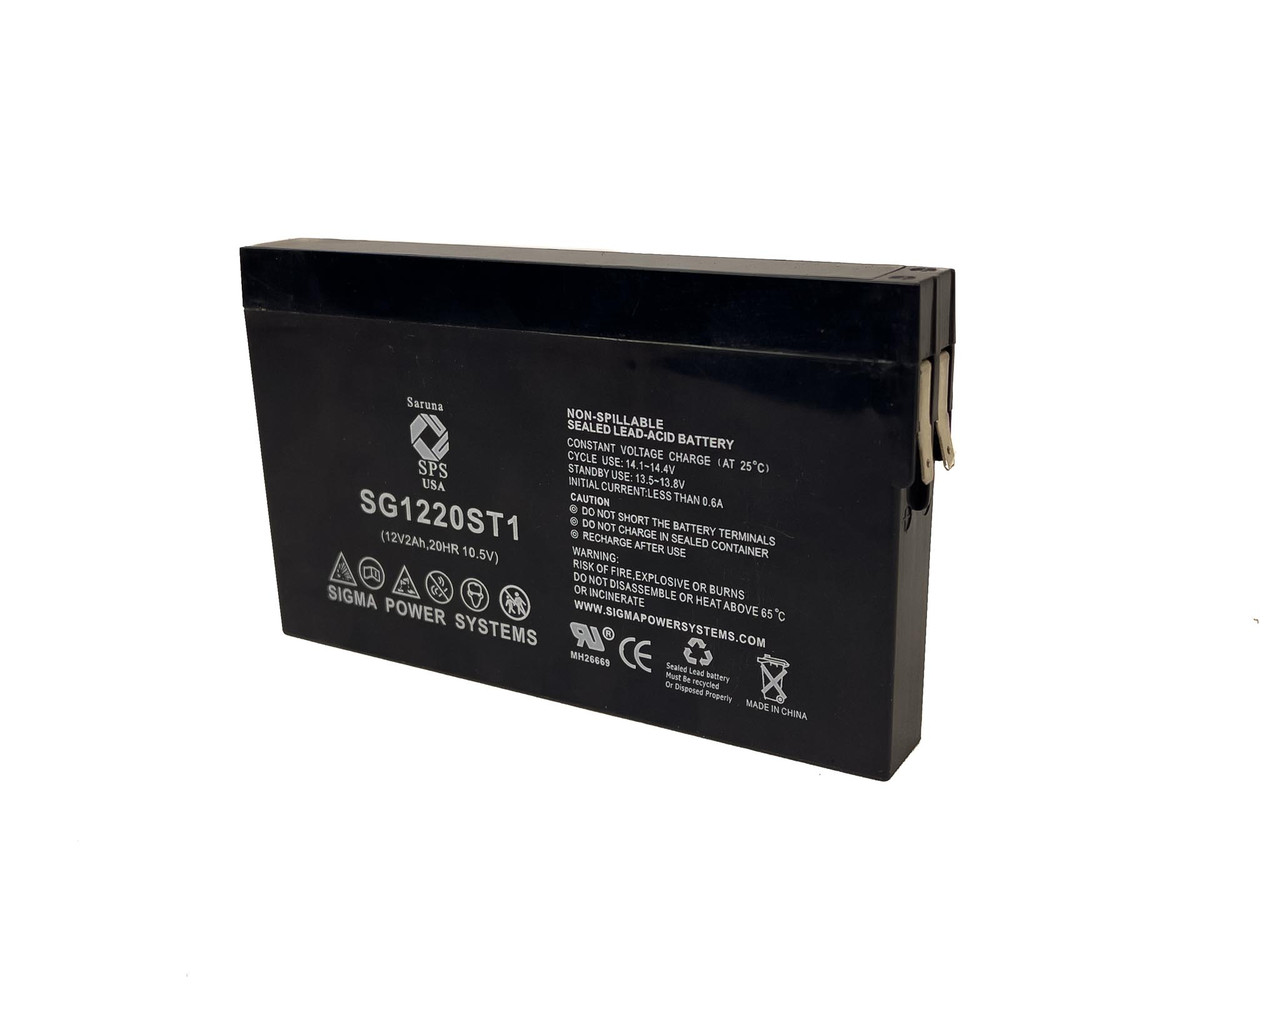 Raion Power 12V 2Ah Non-Spillable Replacement Rechargebale Battery for Baxter Healthcare 6201 FloGuard